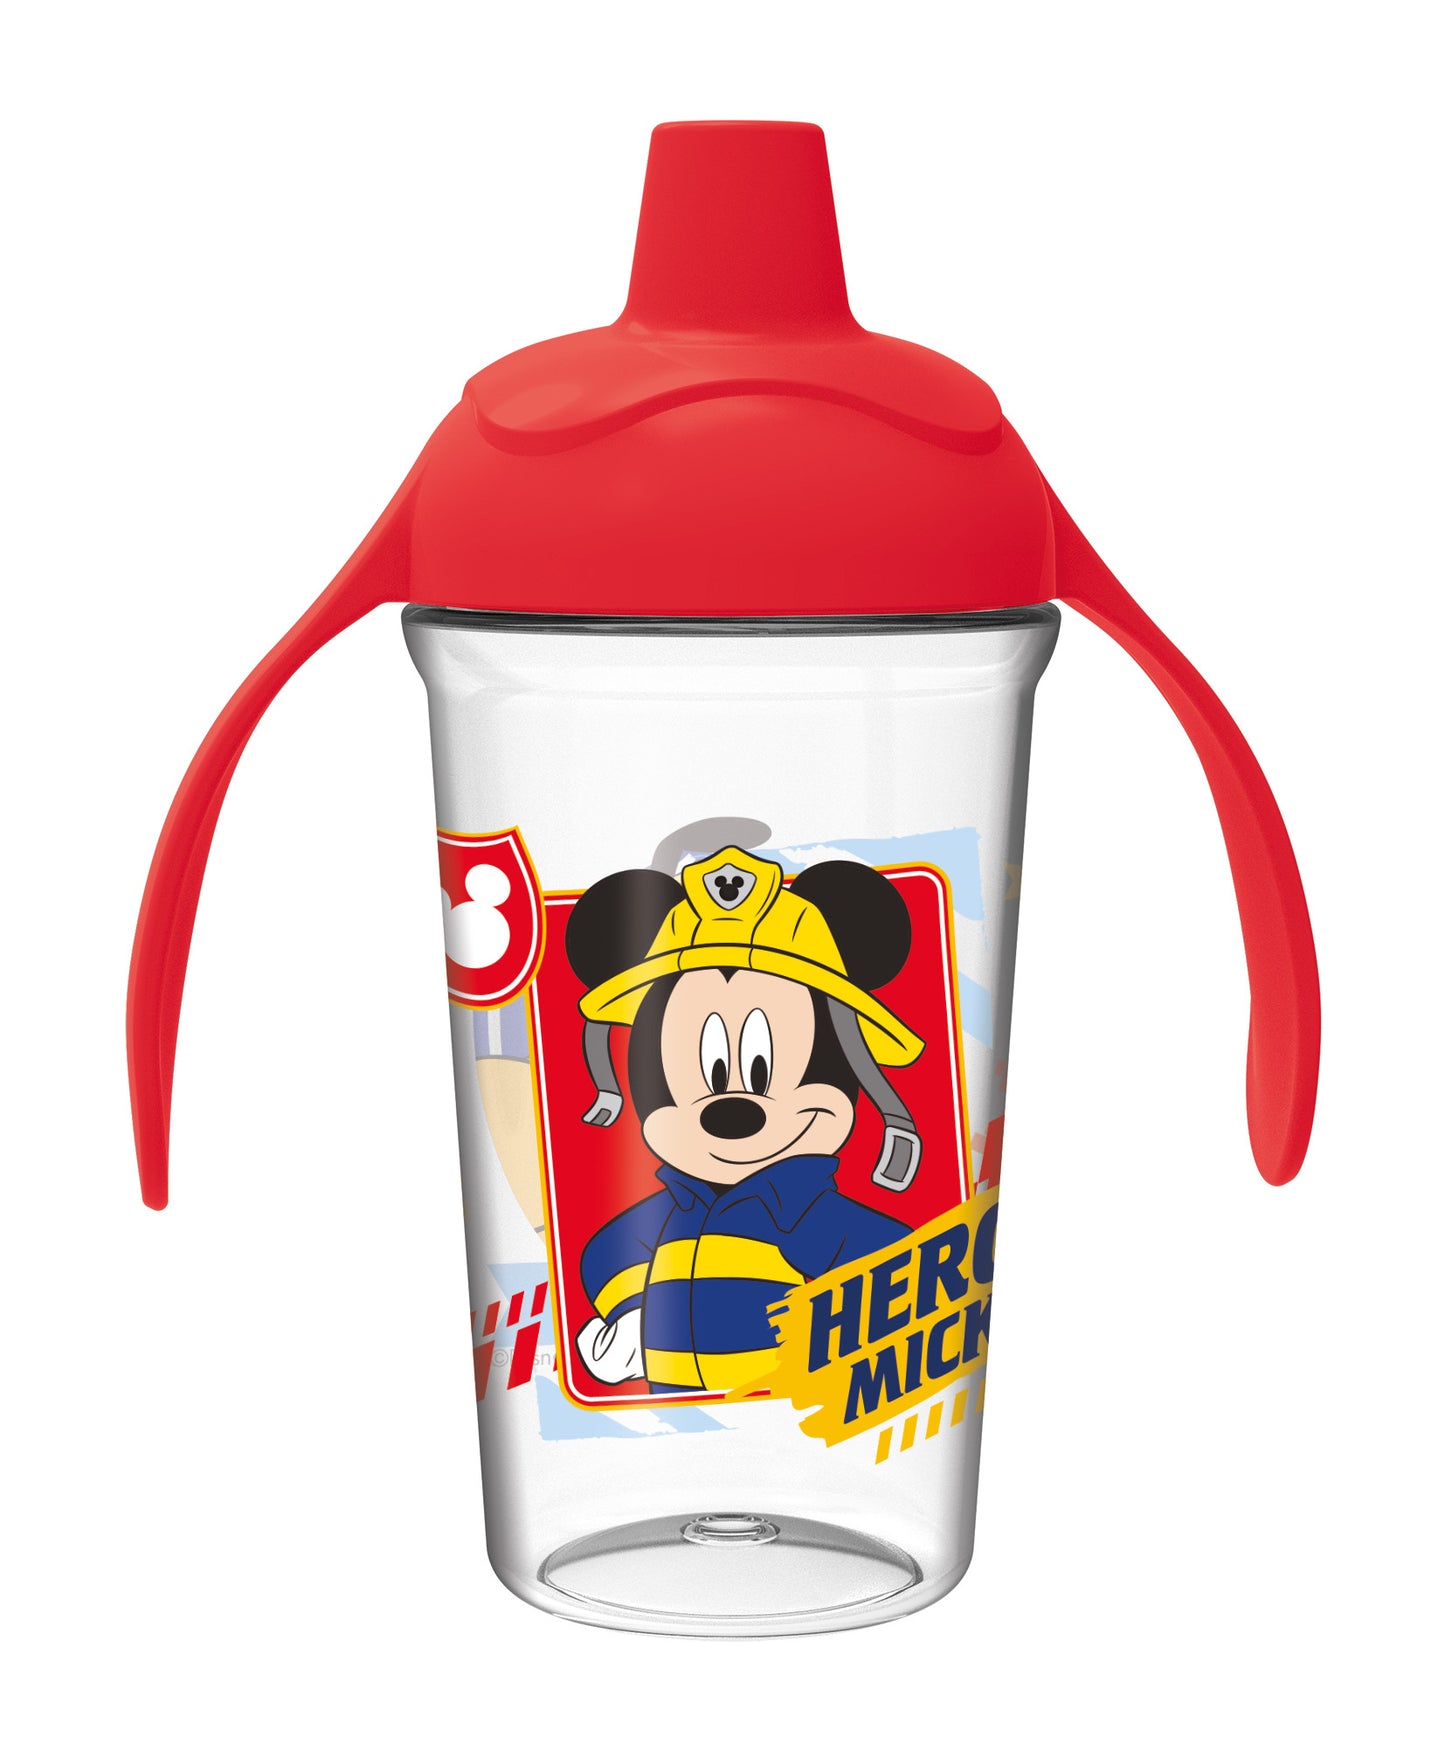 Disney Toddler easy training cup